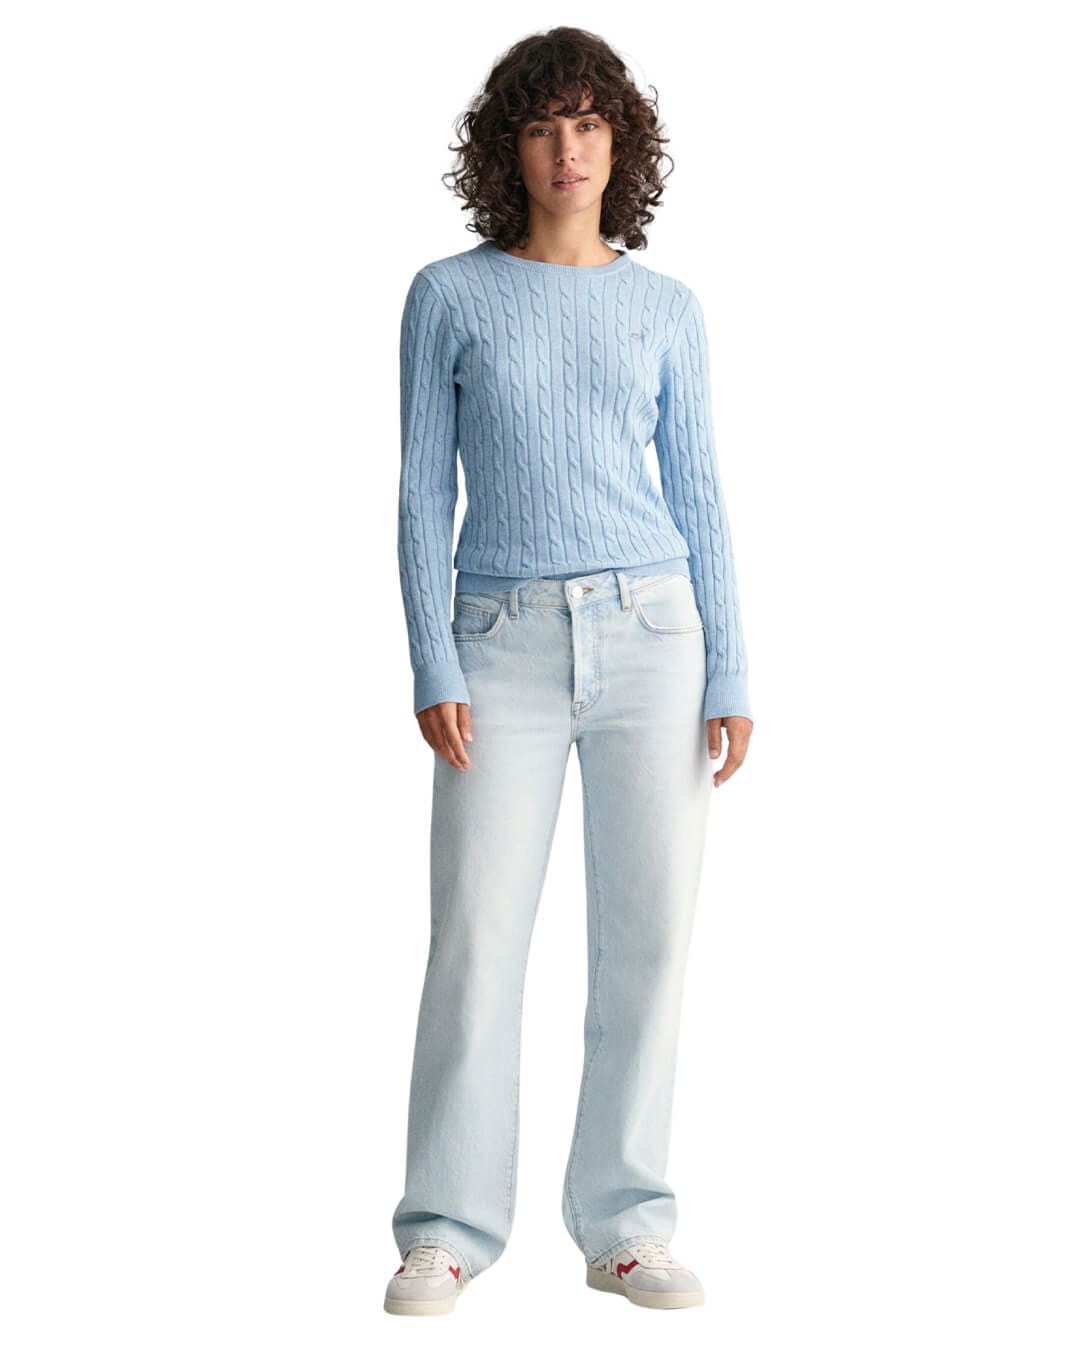 Gant Jumpers Gant Sky Blue Stretch Cotton Cable Knit Crew Neck Sweater